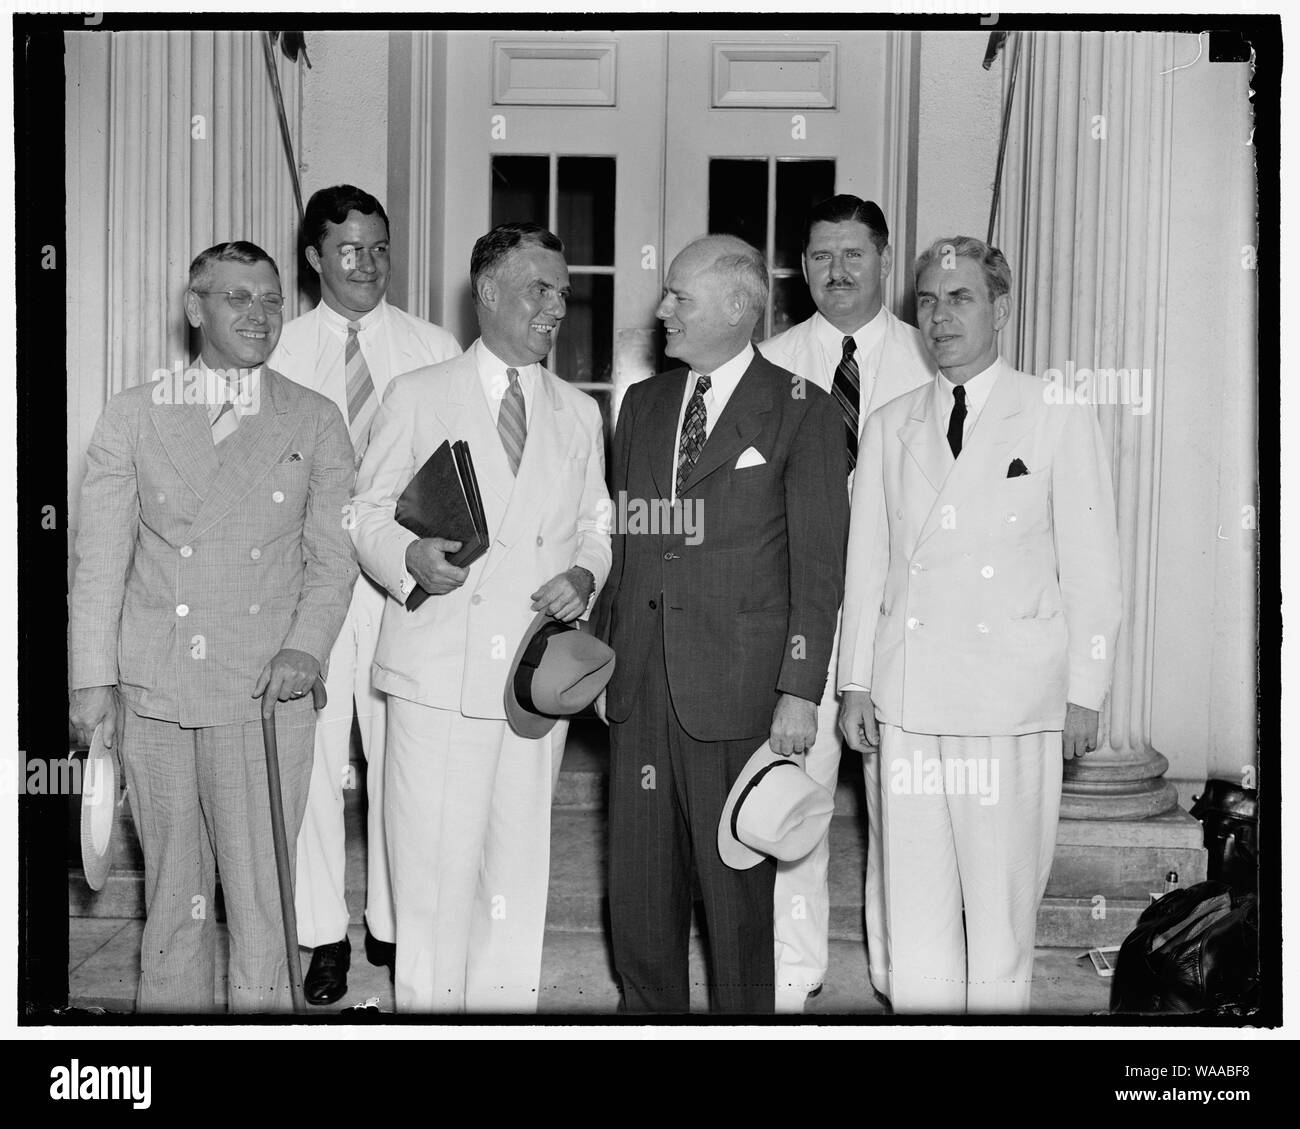 Civil Aeronautics Authority makes first official visit to the White House. Washington, D.C., Sept. 1. The newly created Civil Aeronautics Authority paid it's first visit to the White House today in it's official capacity to report to the president about the progress of the commission. Left to right; front; Harlee Branch, Edward J. Noble, Chairman, Robert Hinckley, and Oswald Ryan. Left to r, rear; G. Grant Mason, and Clinton Hester, 9/1/38 Stock Photo